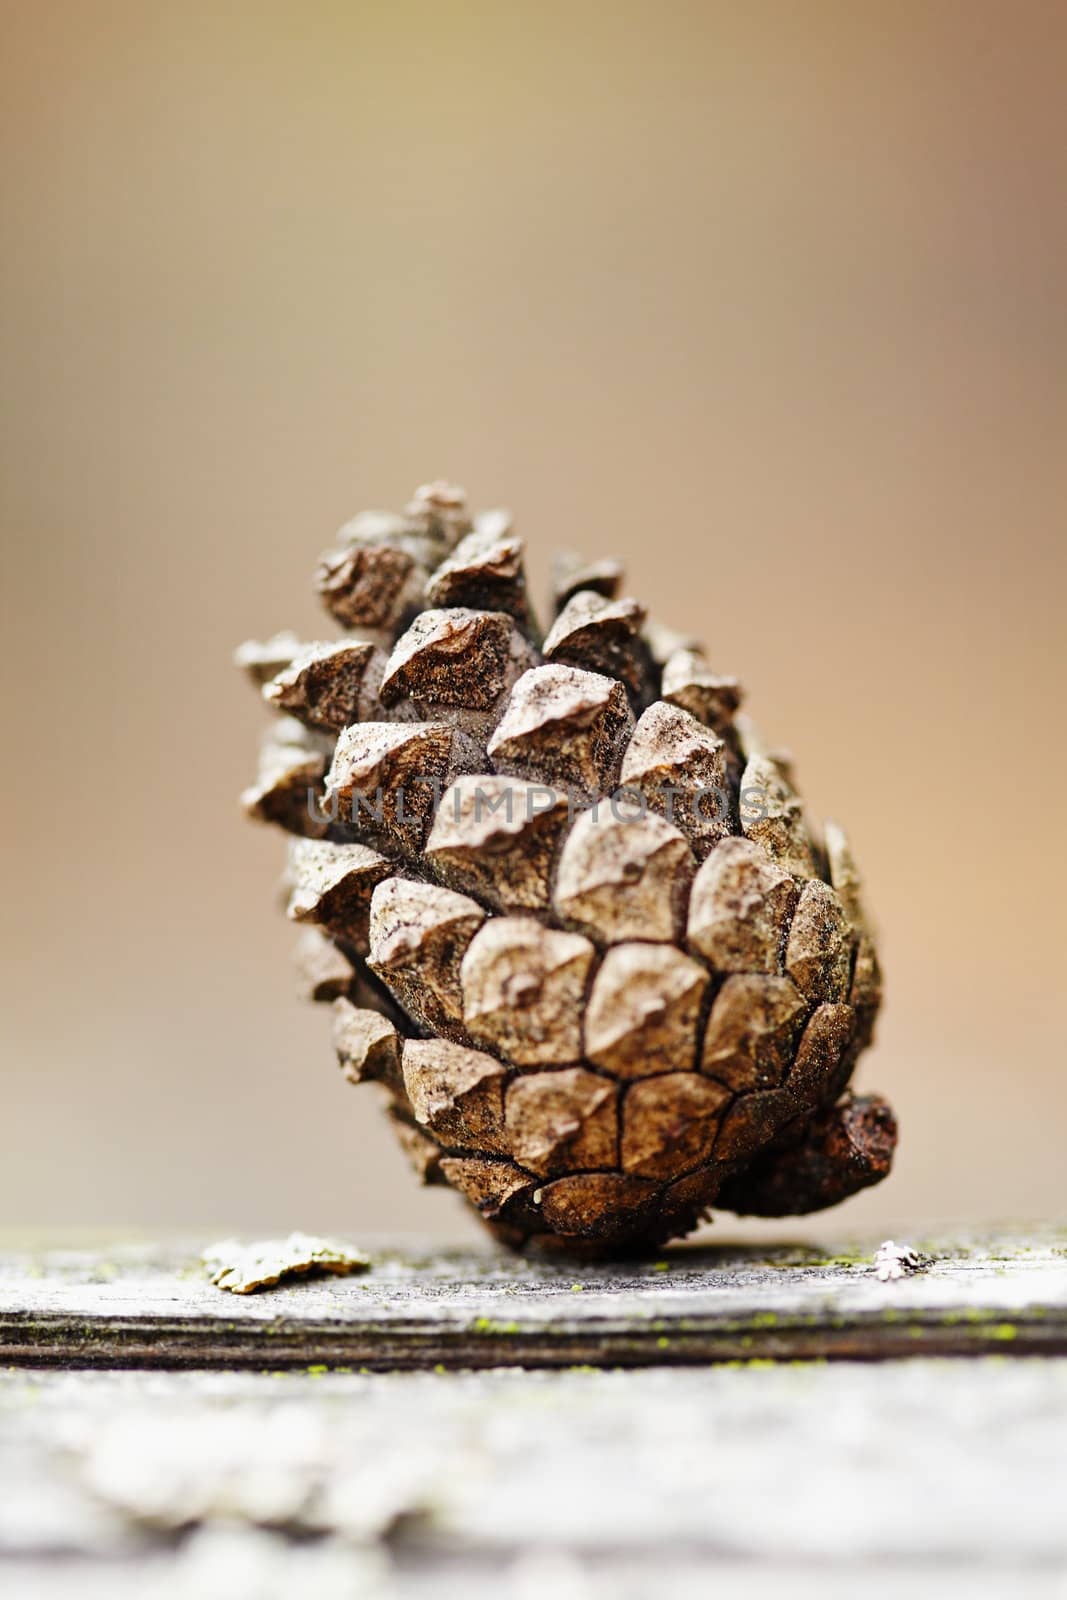 Old pine cone lies on a log close up